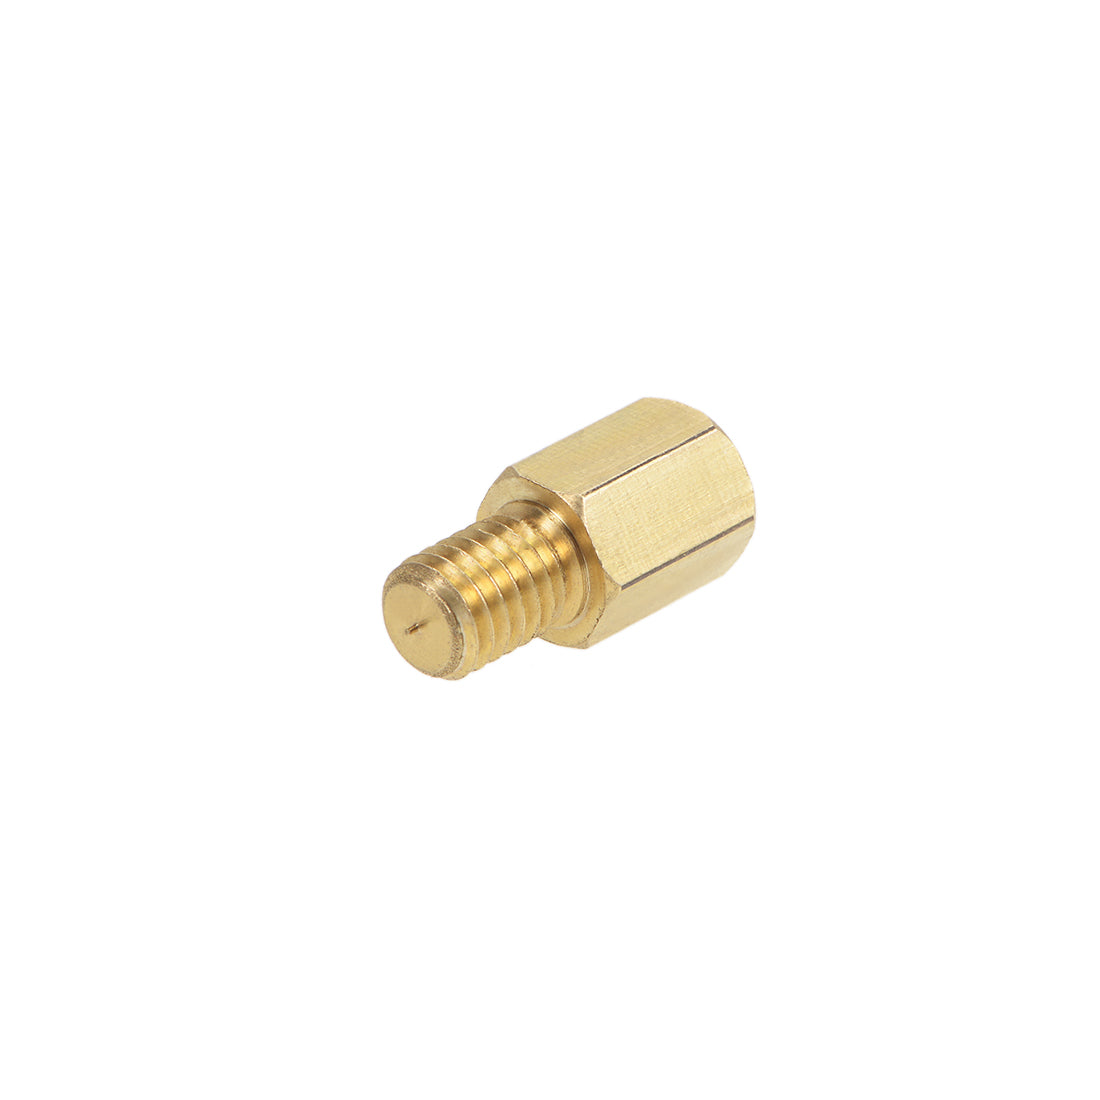 Uxcell Uxcell M6 x 35 mm + 8 mm Male to Female Hex Brass Spacer Standoff 5pcs